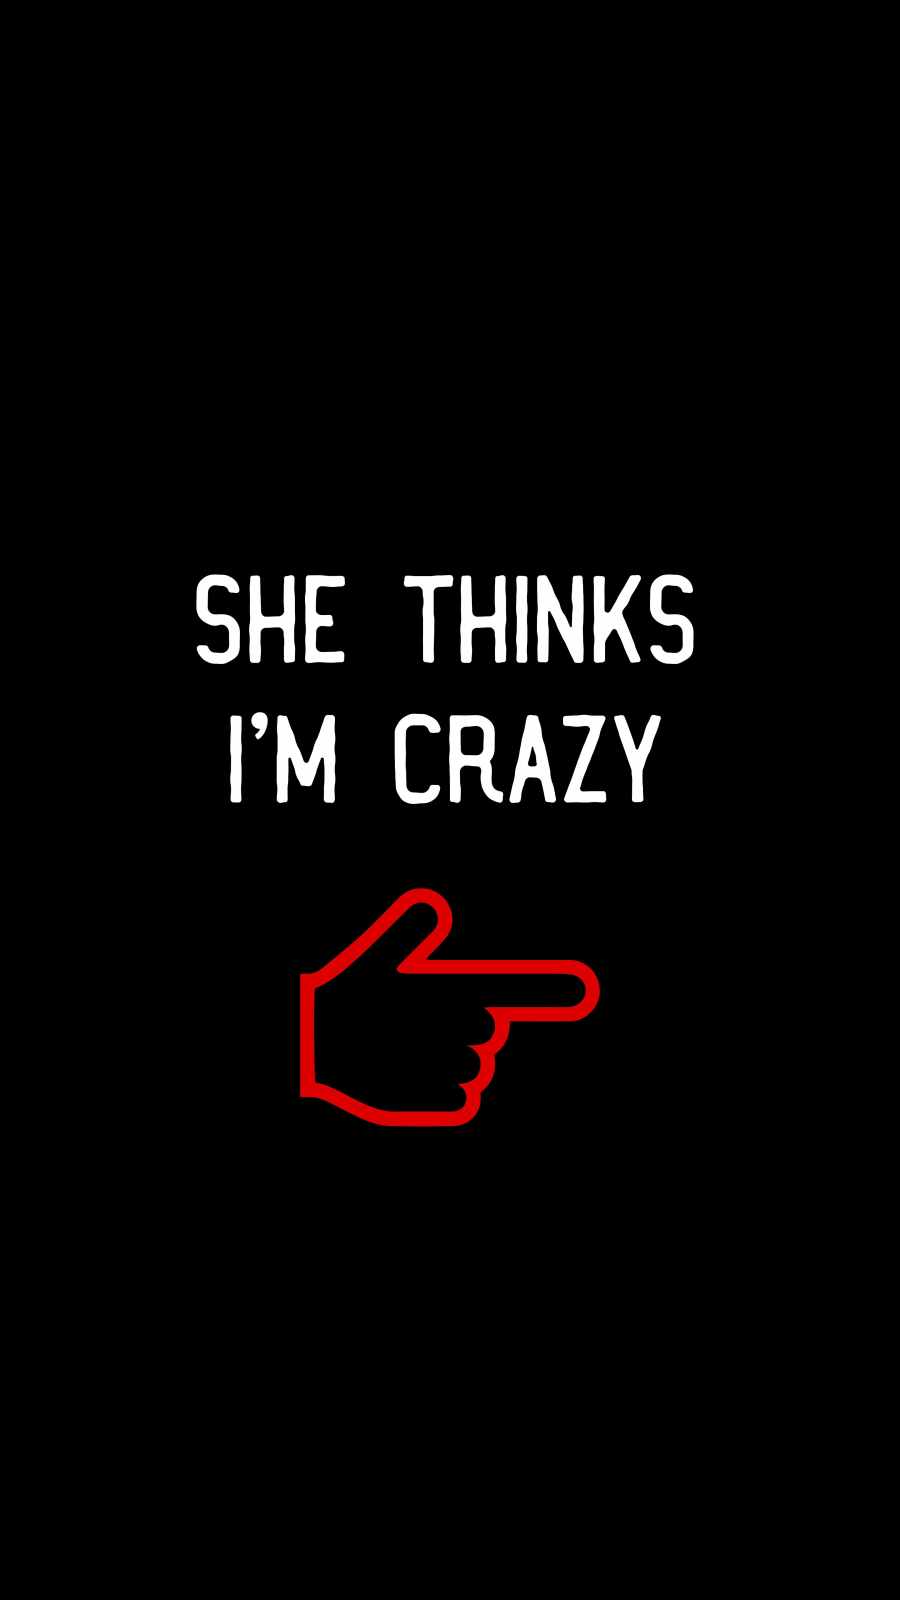 She Thinks I Am Crazy Wallpaper, iPhone Wallpaper. iPhone wallpaper, Wallpaper, Free iphone wallpaper